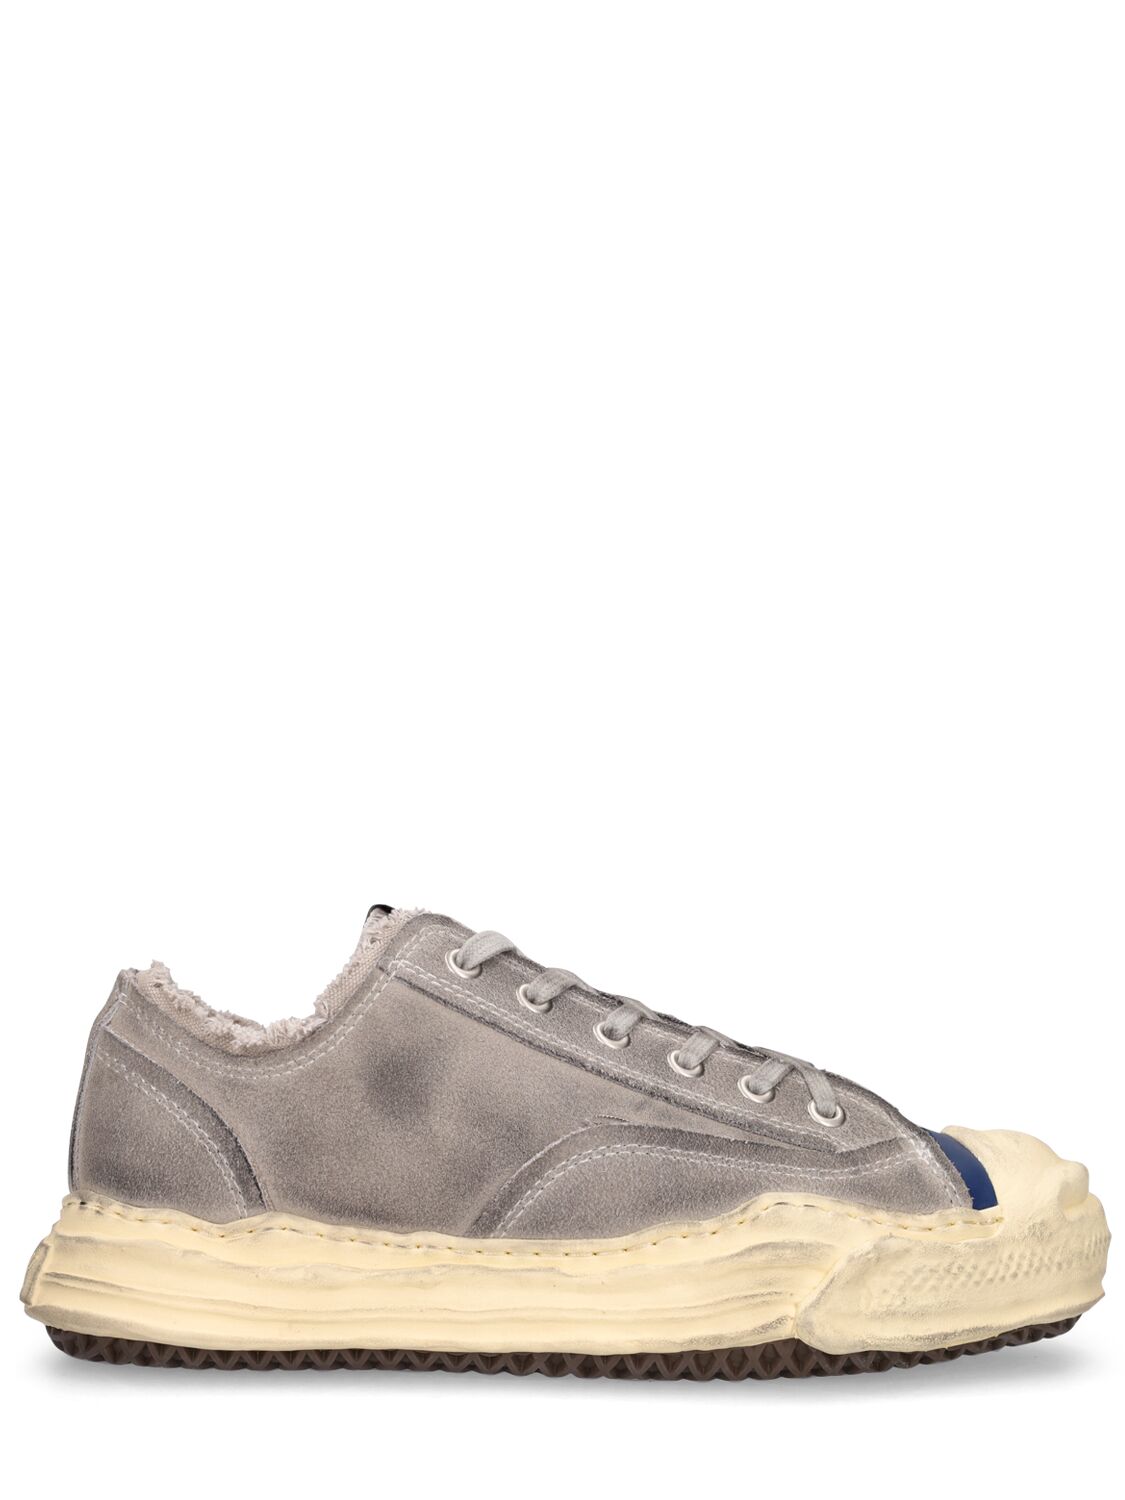 Image of Bed Jw Ford Blakey Low Top Sneakers